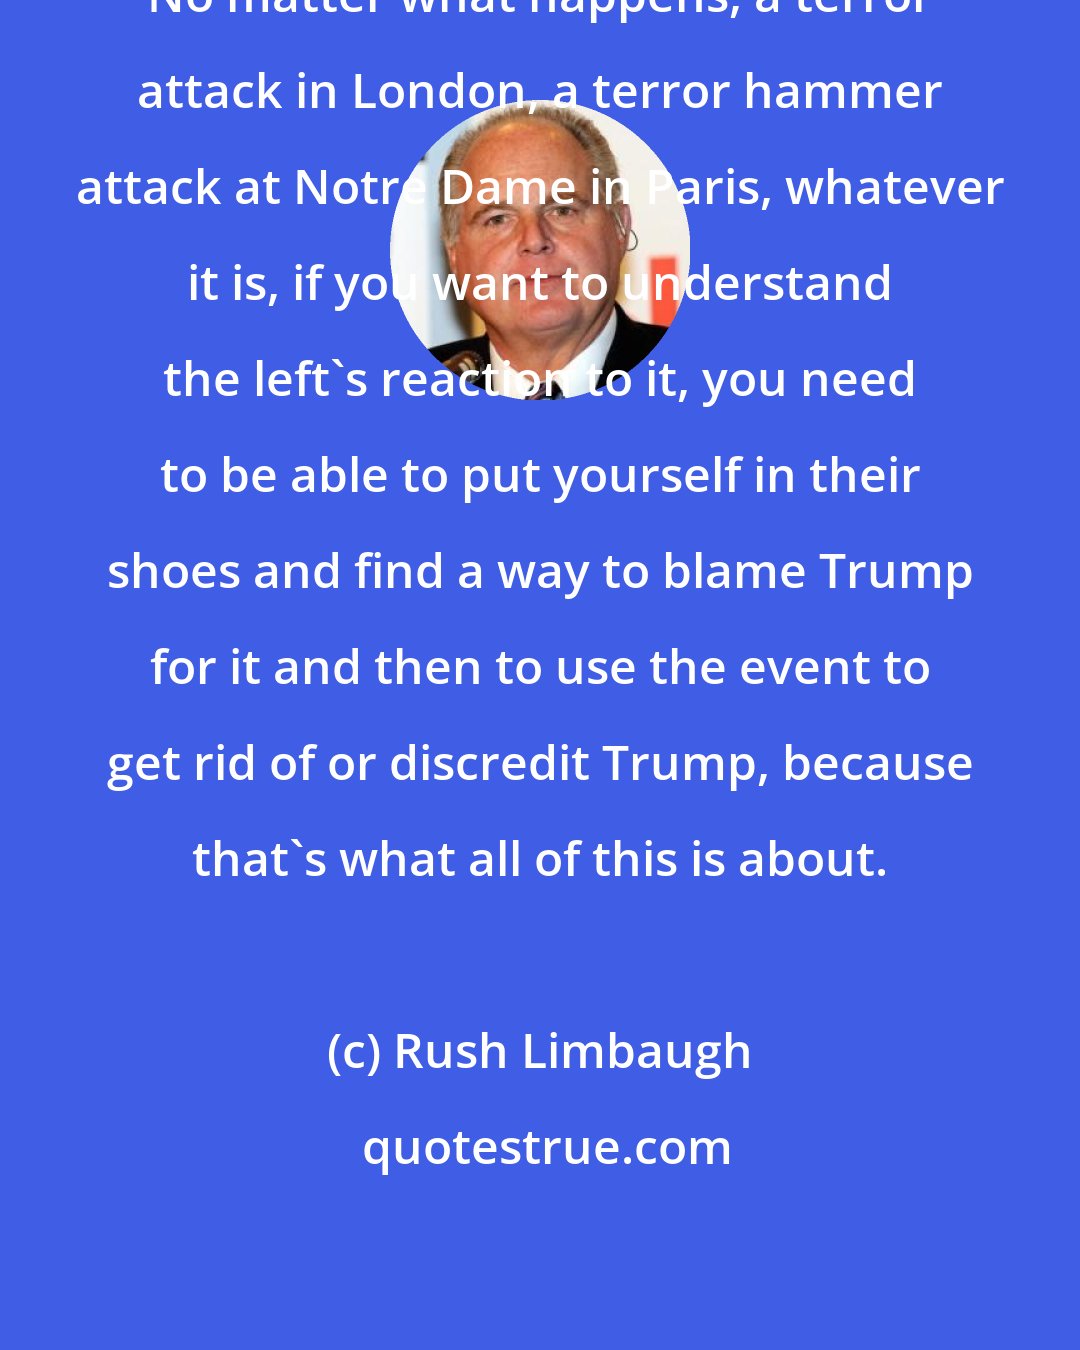 Rush Limbaugh: No matter what happens, a terror attack in London, a terror hammer attack at Notre Dame in Paris, whatever it is, if you want to understand the left's reaction to it, you need to be able to put yourself in their shoes and find a way to blame Trump for it and then to use the event to get rid of or discredit Trump, because that's what all of this is about.